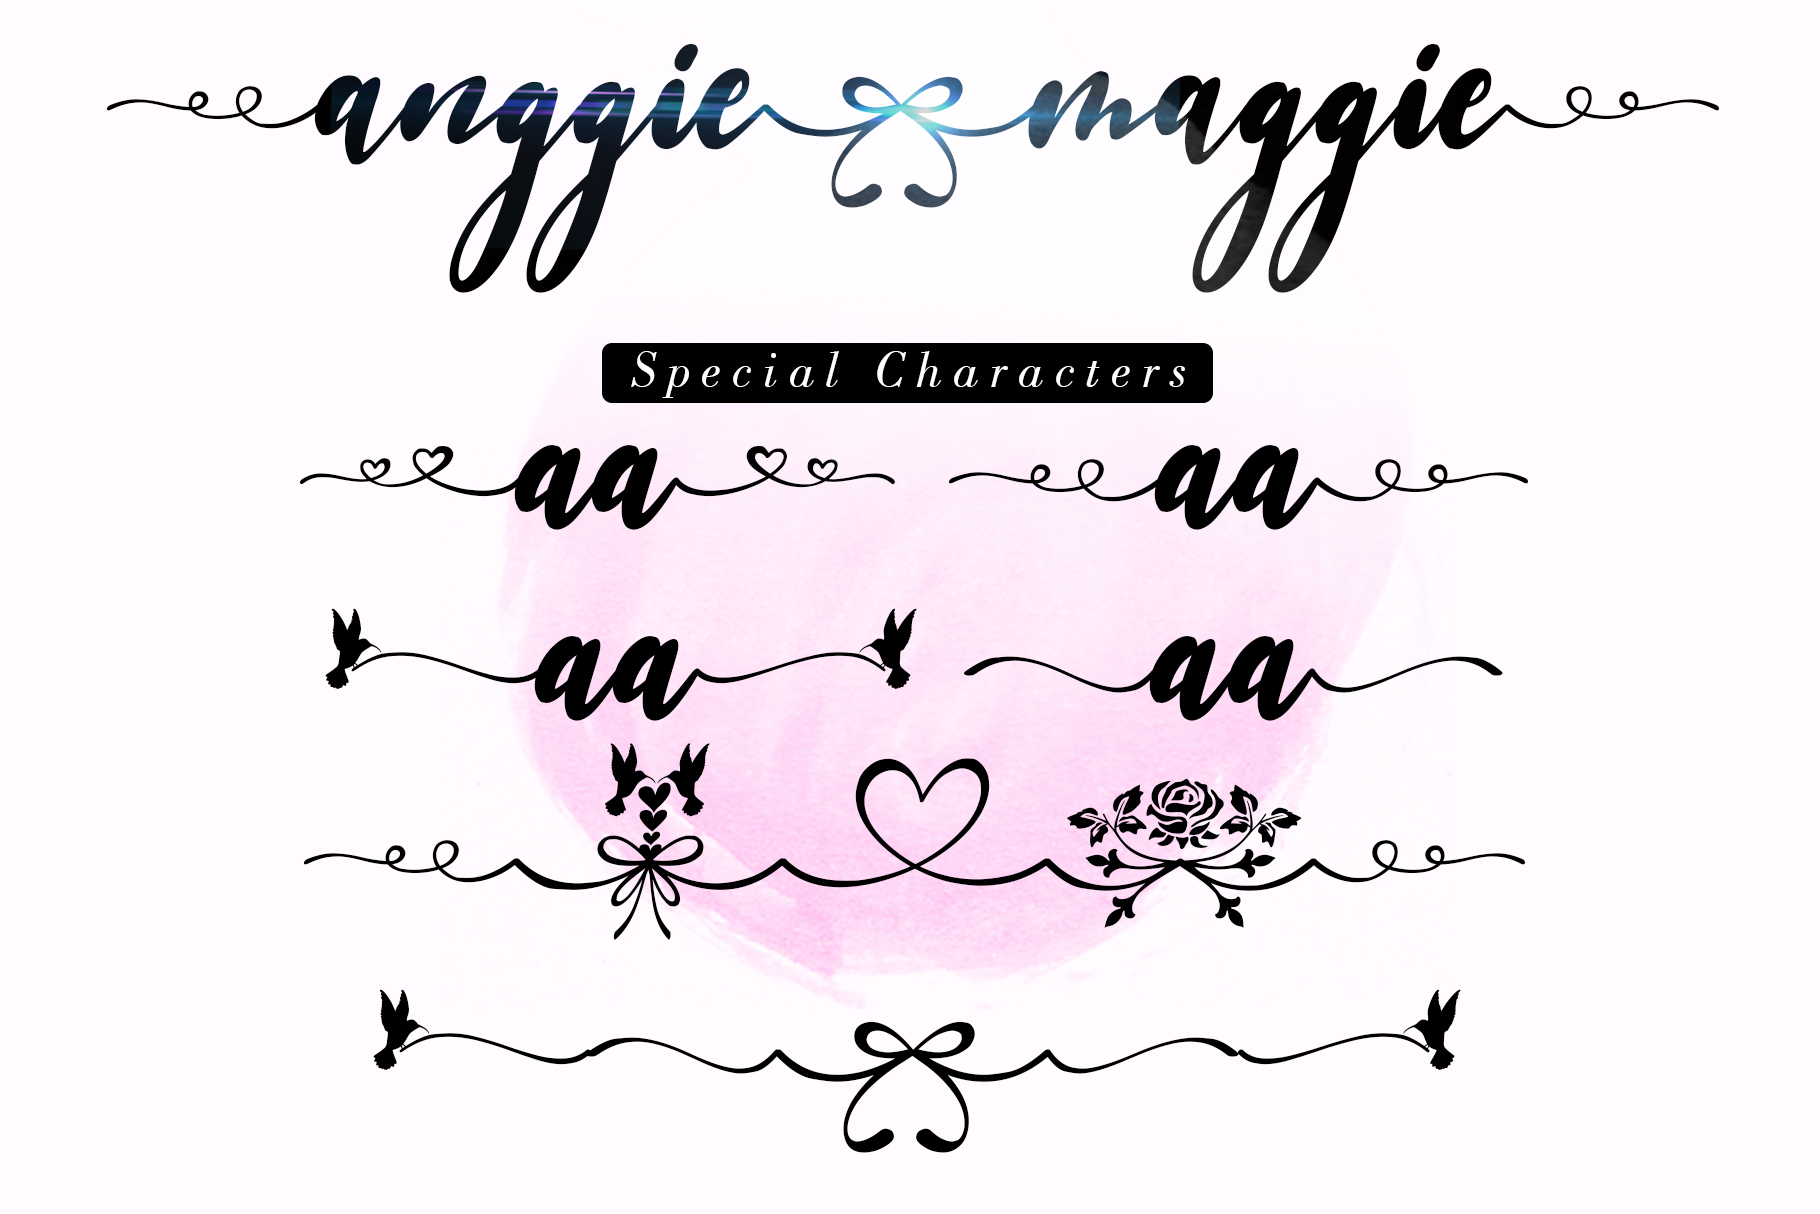 Anggie Maggie